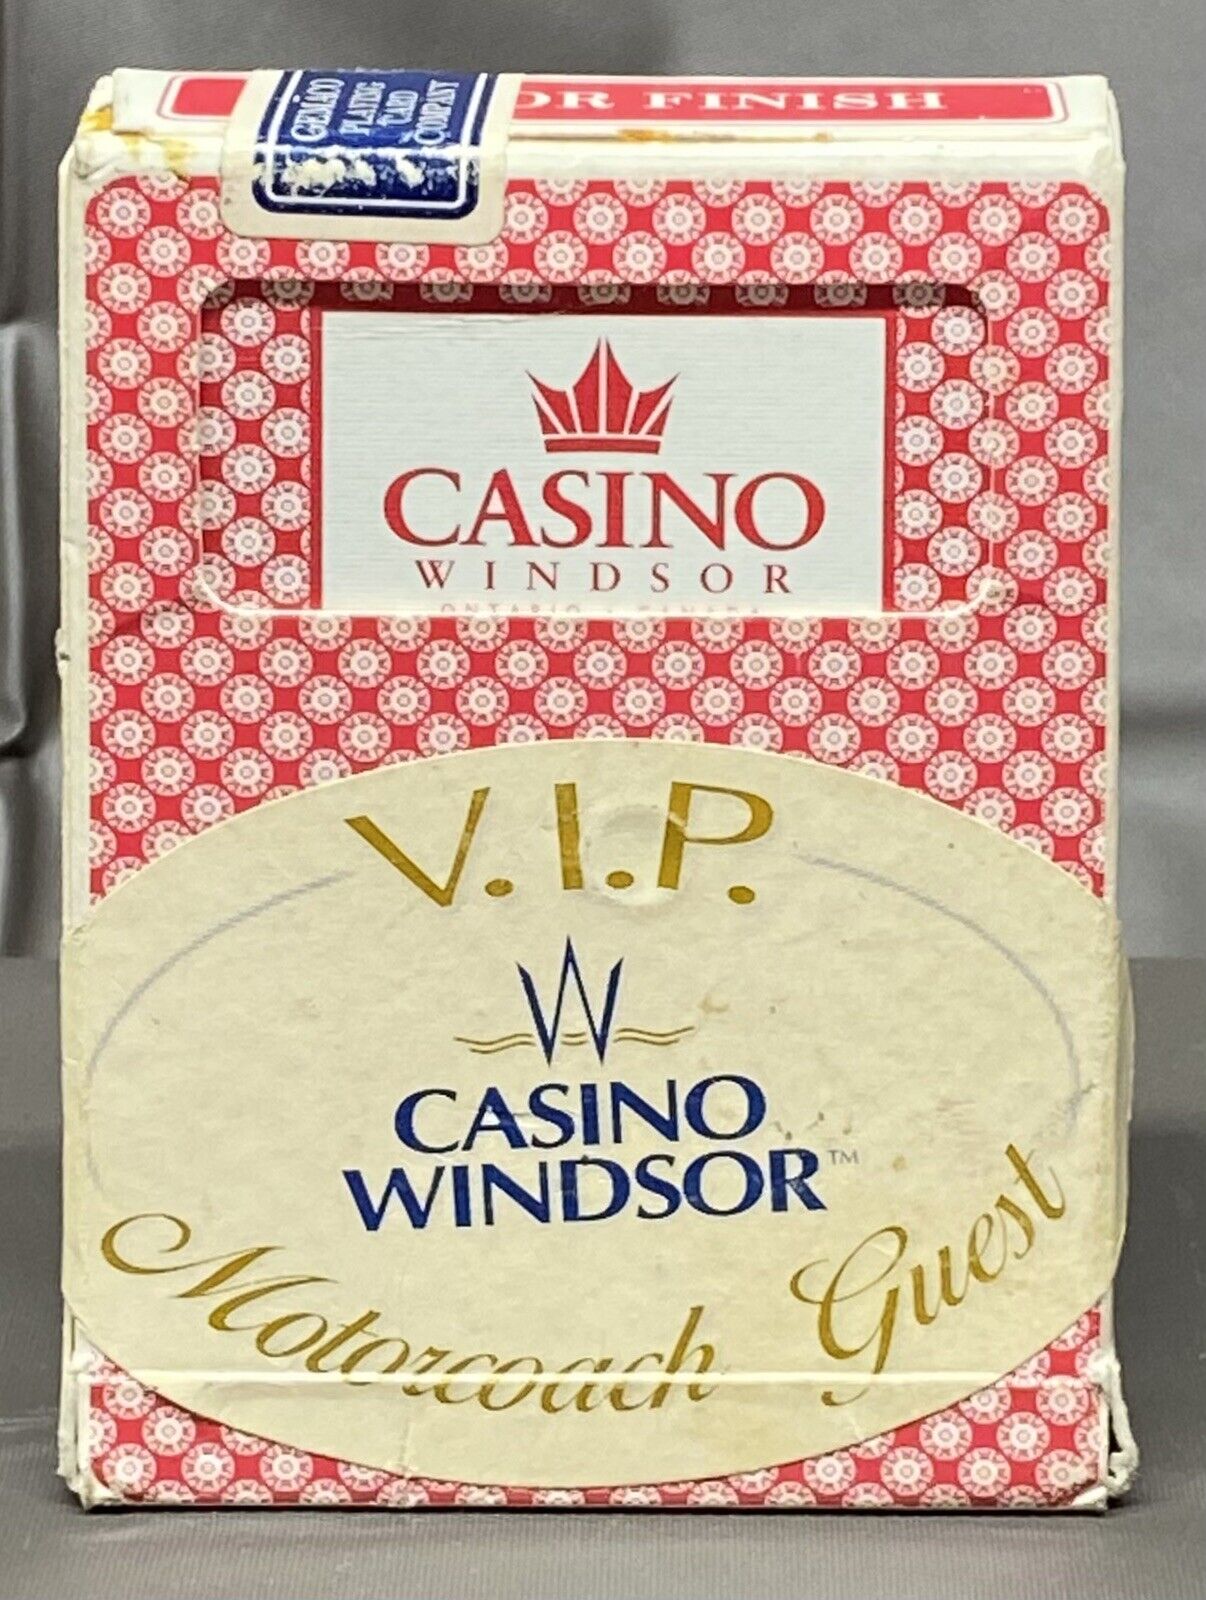 OFFICIAL CASINO WINDSOR USED GEMACO PLAYING CARDS